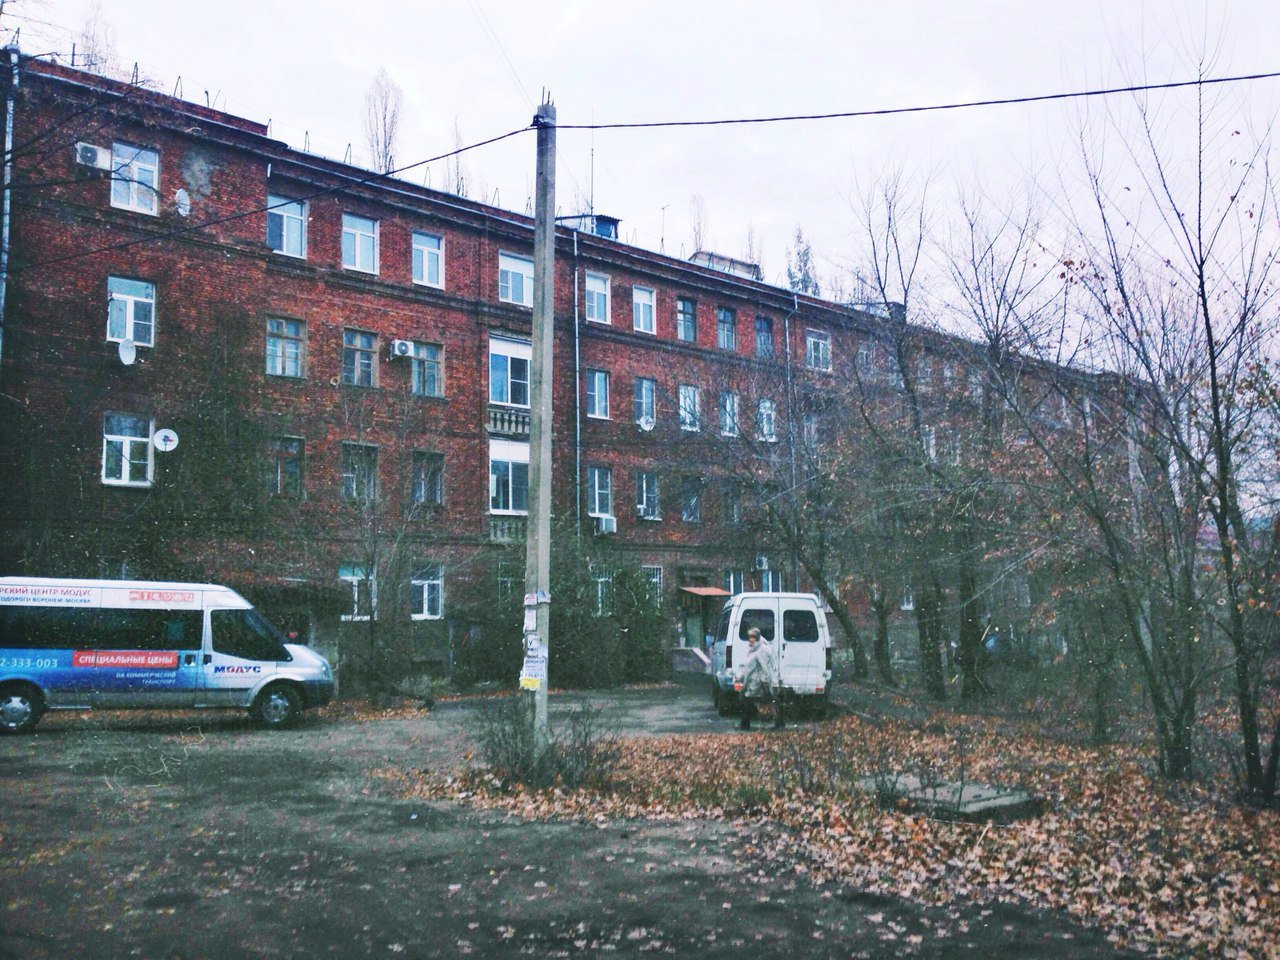 House City Russia Faded Grey Gloomy Car Trees Fall Fallen Leaves Block Of Flats 1280x960